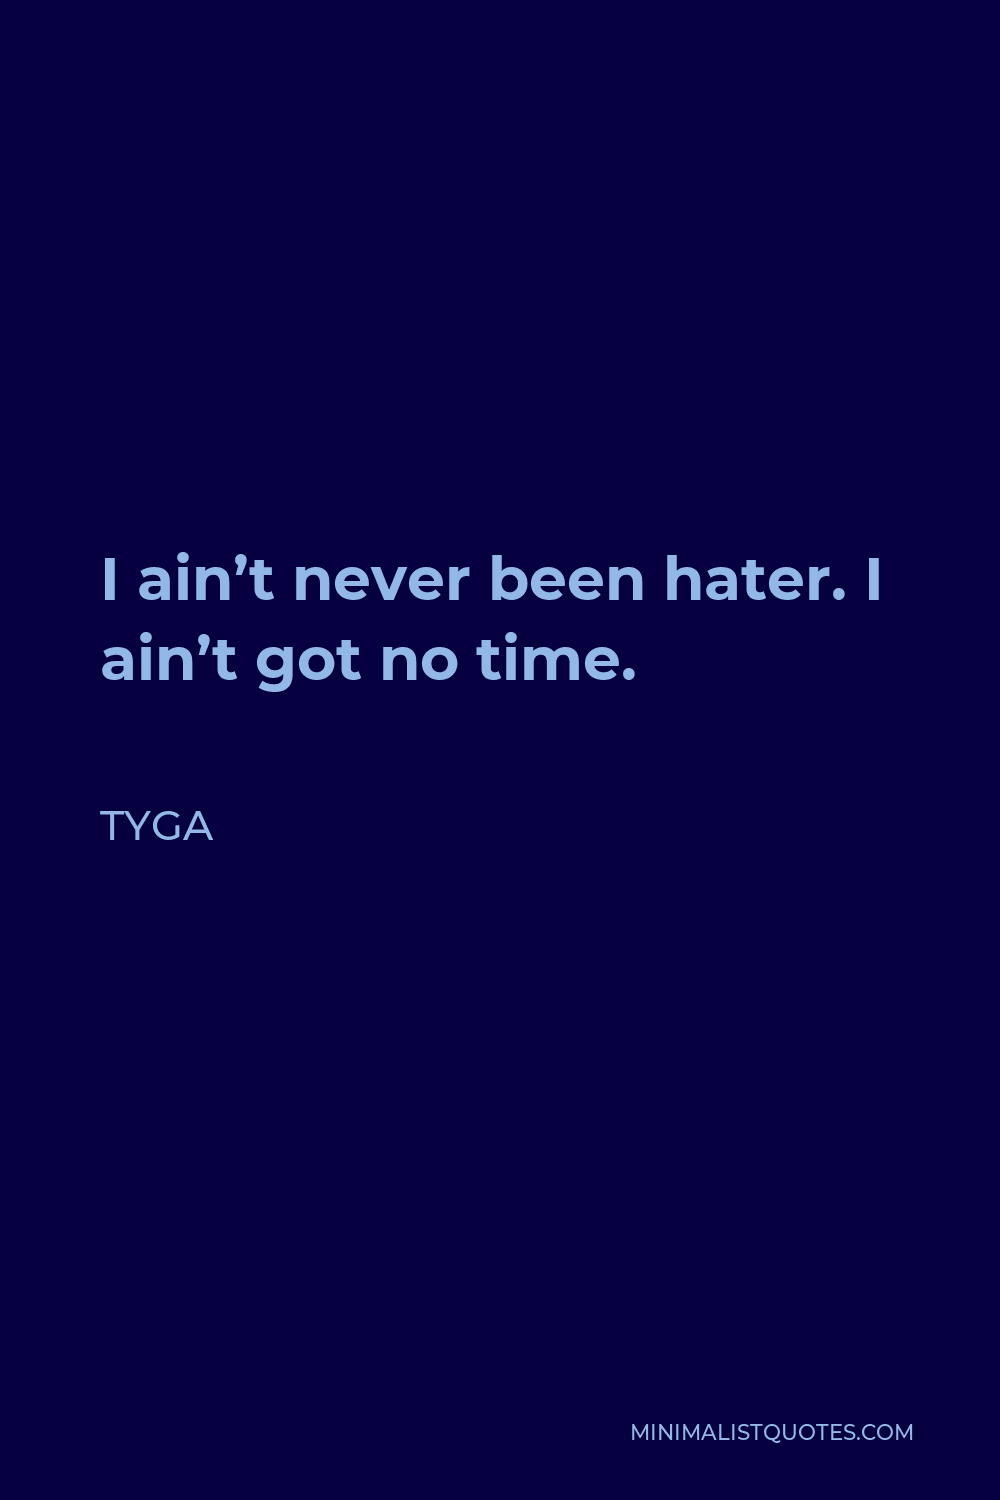 Tyga Quote - I ain’t never been hater. I ain’t got no time.